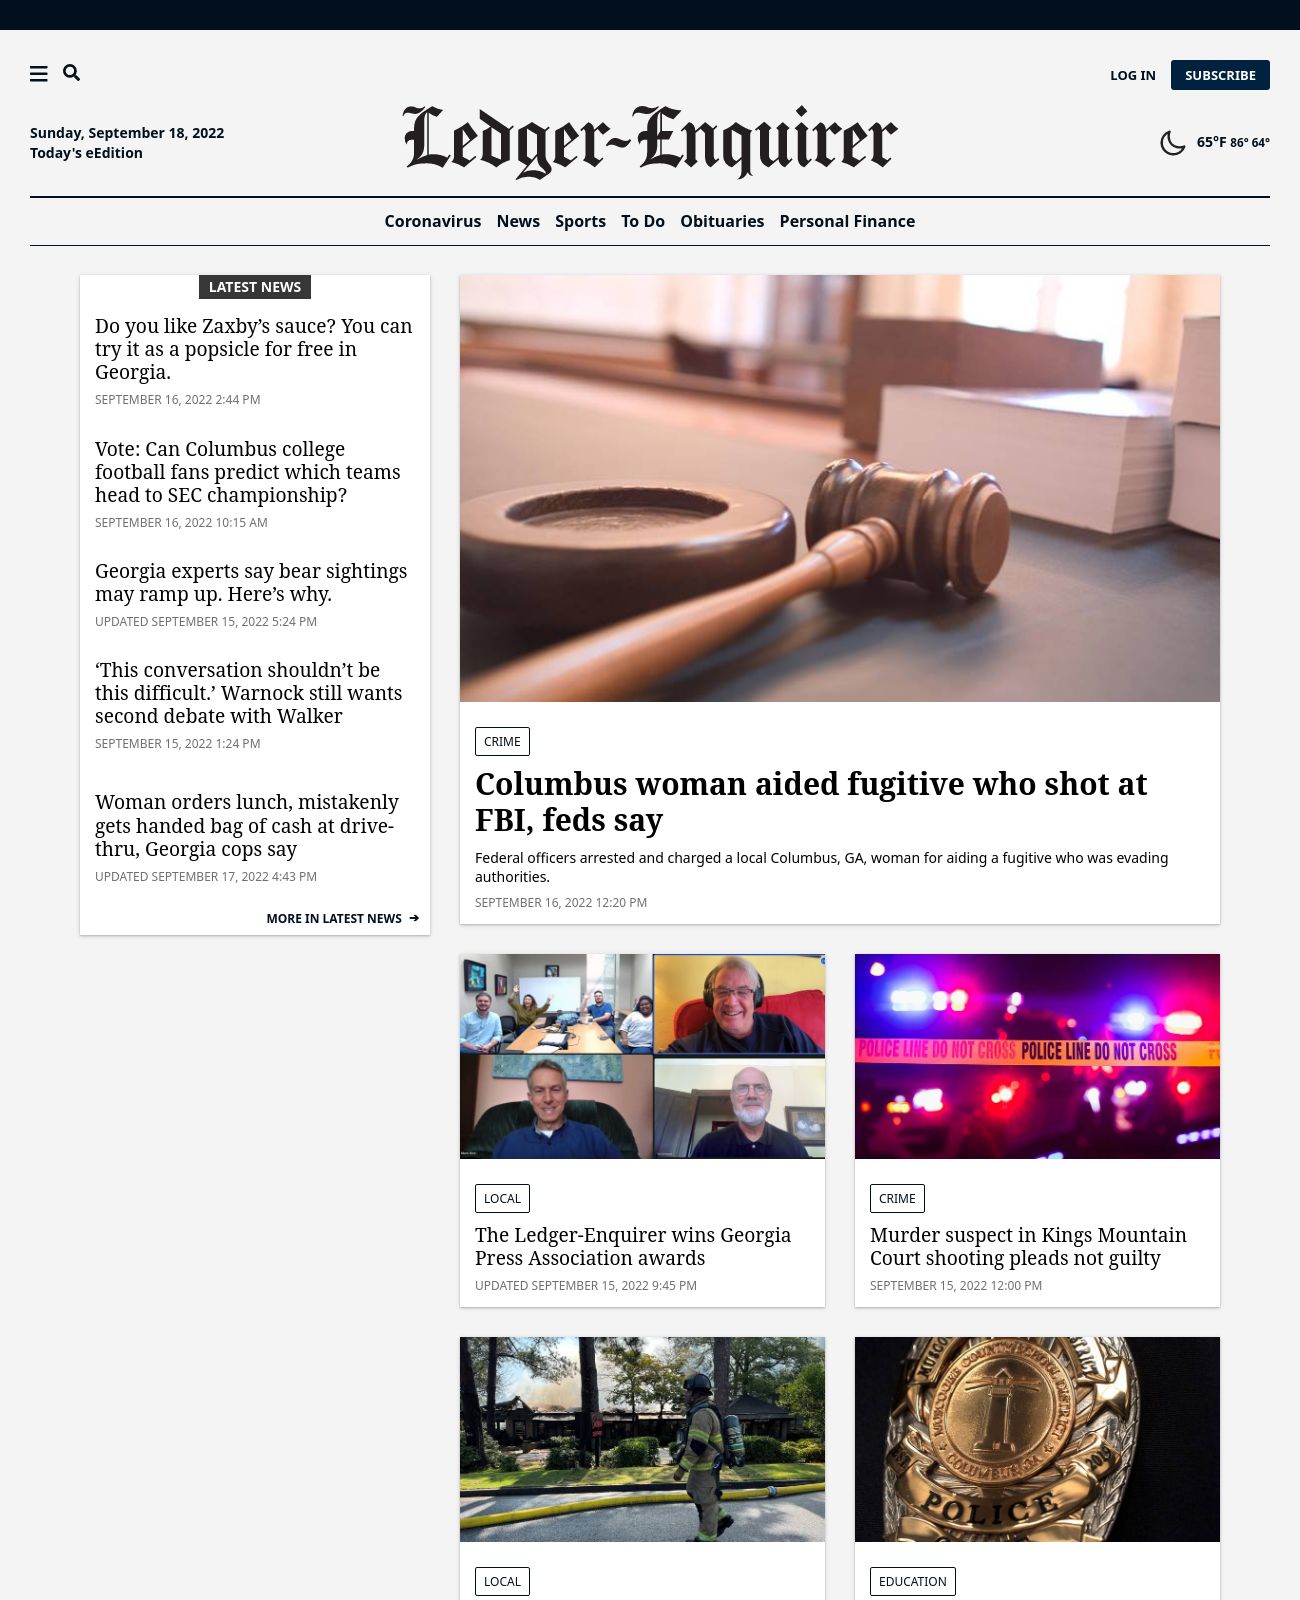 The Ledger-Enquirer at 2022-09-18 08:00:58-04:00 local time